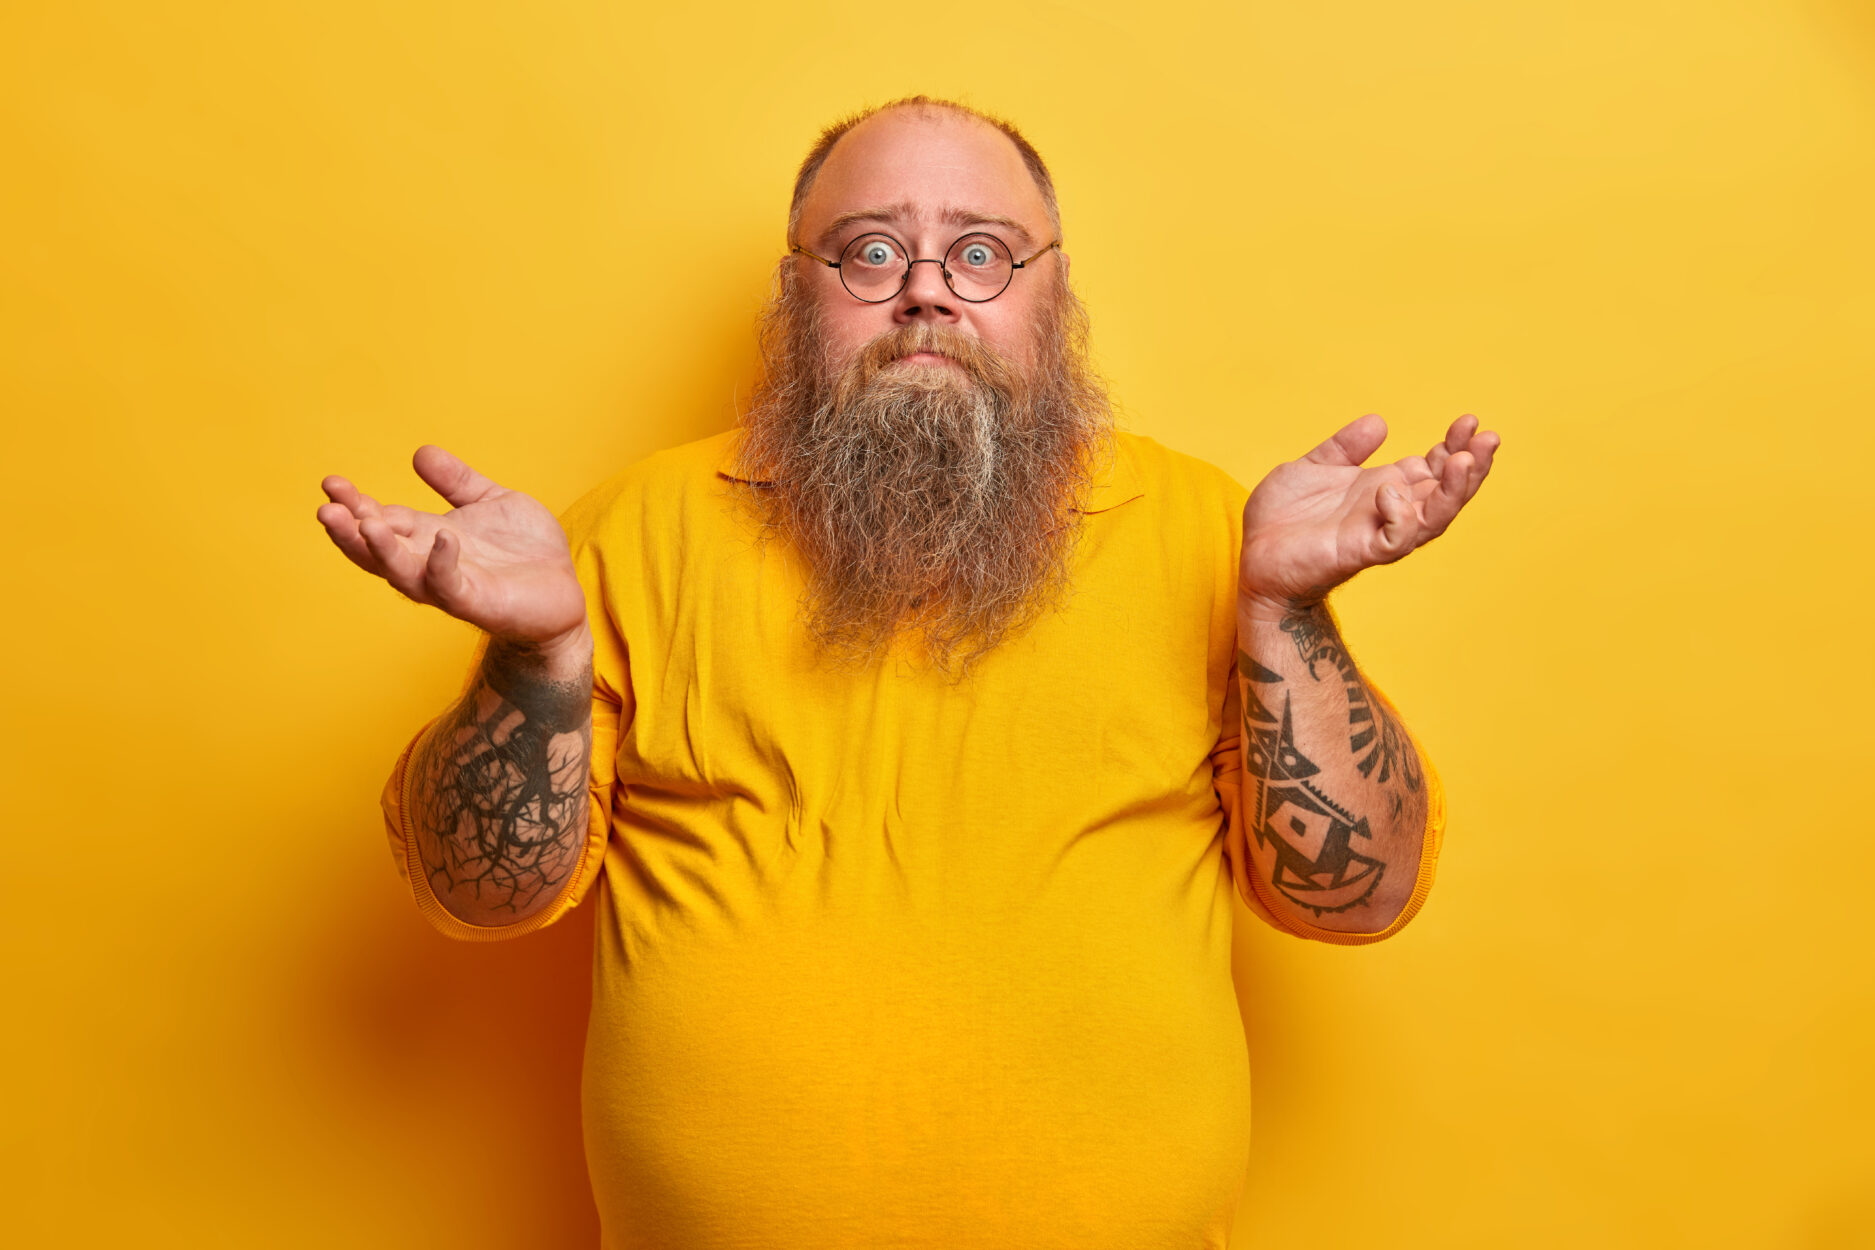 Indoor shot of hesitant bearded man with excess weight shrugs shoulders and stands unaware, has thick beard, big beer belly, dressed in yellow t shirt, round spectacles, faces difficult choice.